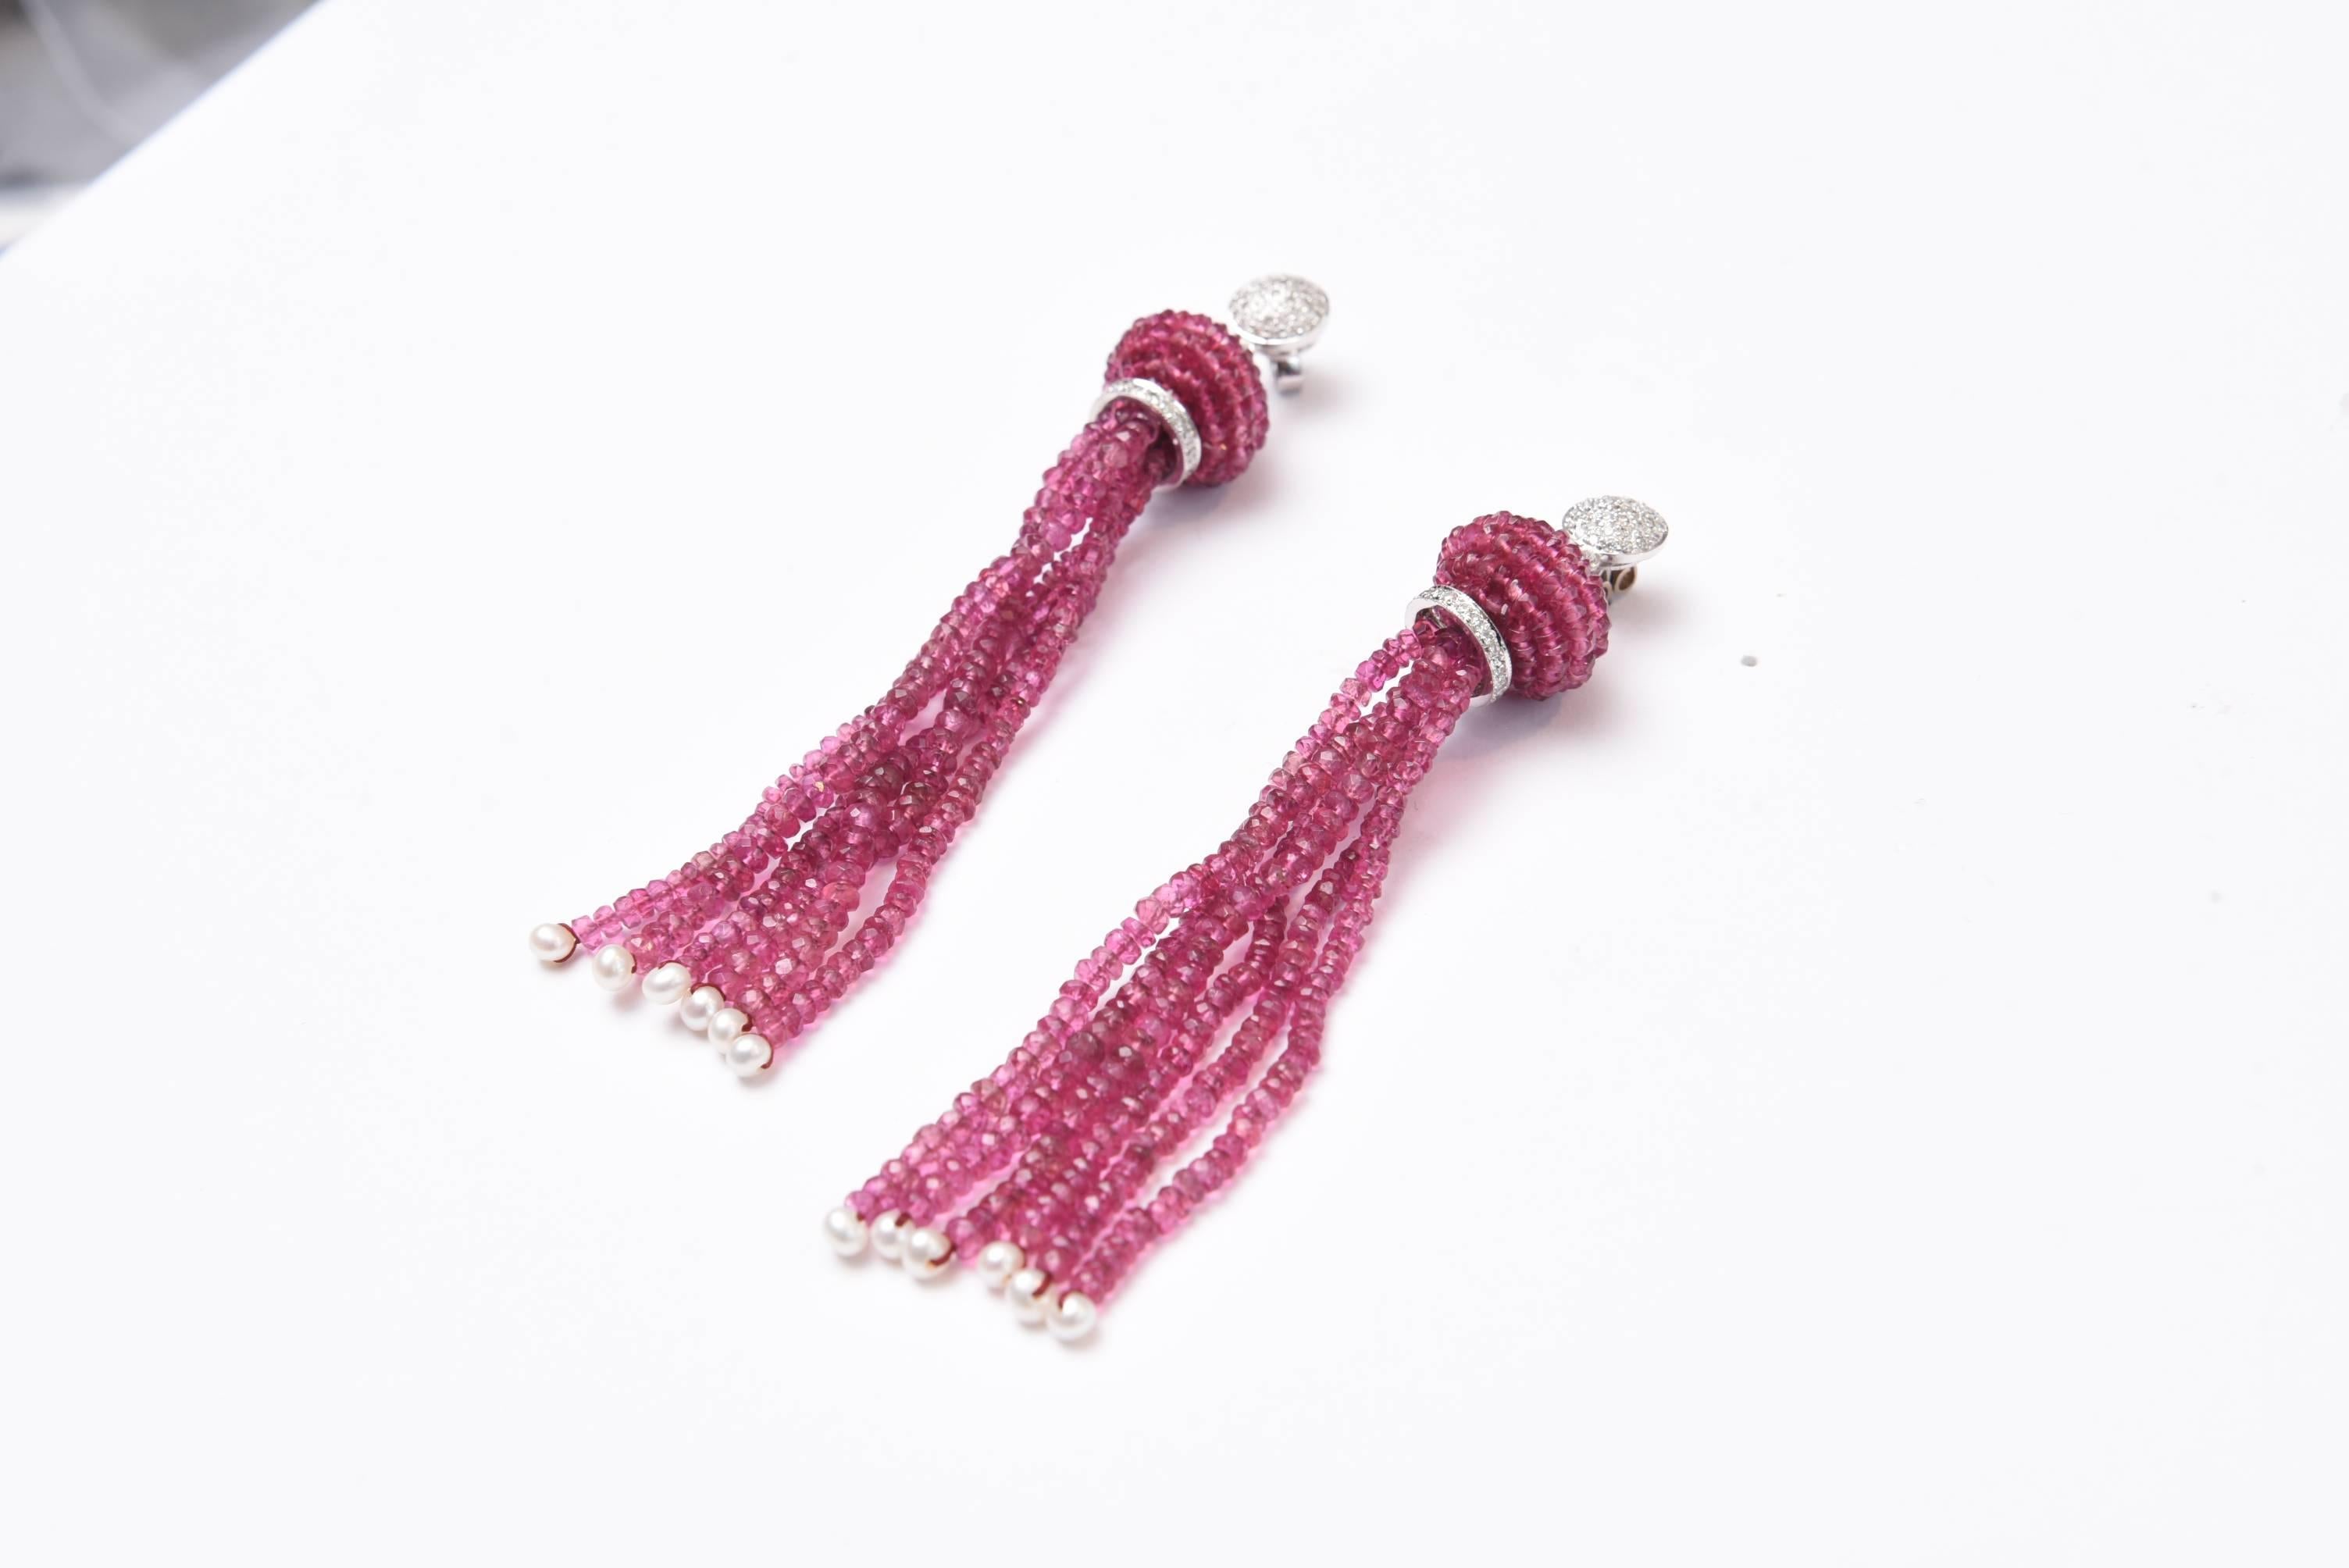 Pair of faceted pink tourmalines with seed pearls at the bottom.  18K white gold and pave` set diamond rondells as well as the top stud which has a 3/8ths inch diameter  Great look and movement.  For pierced ears.